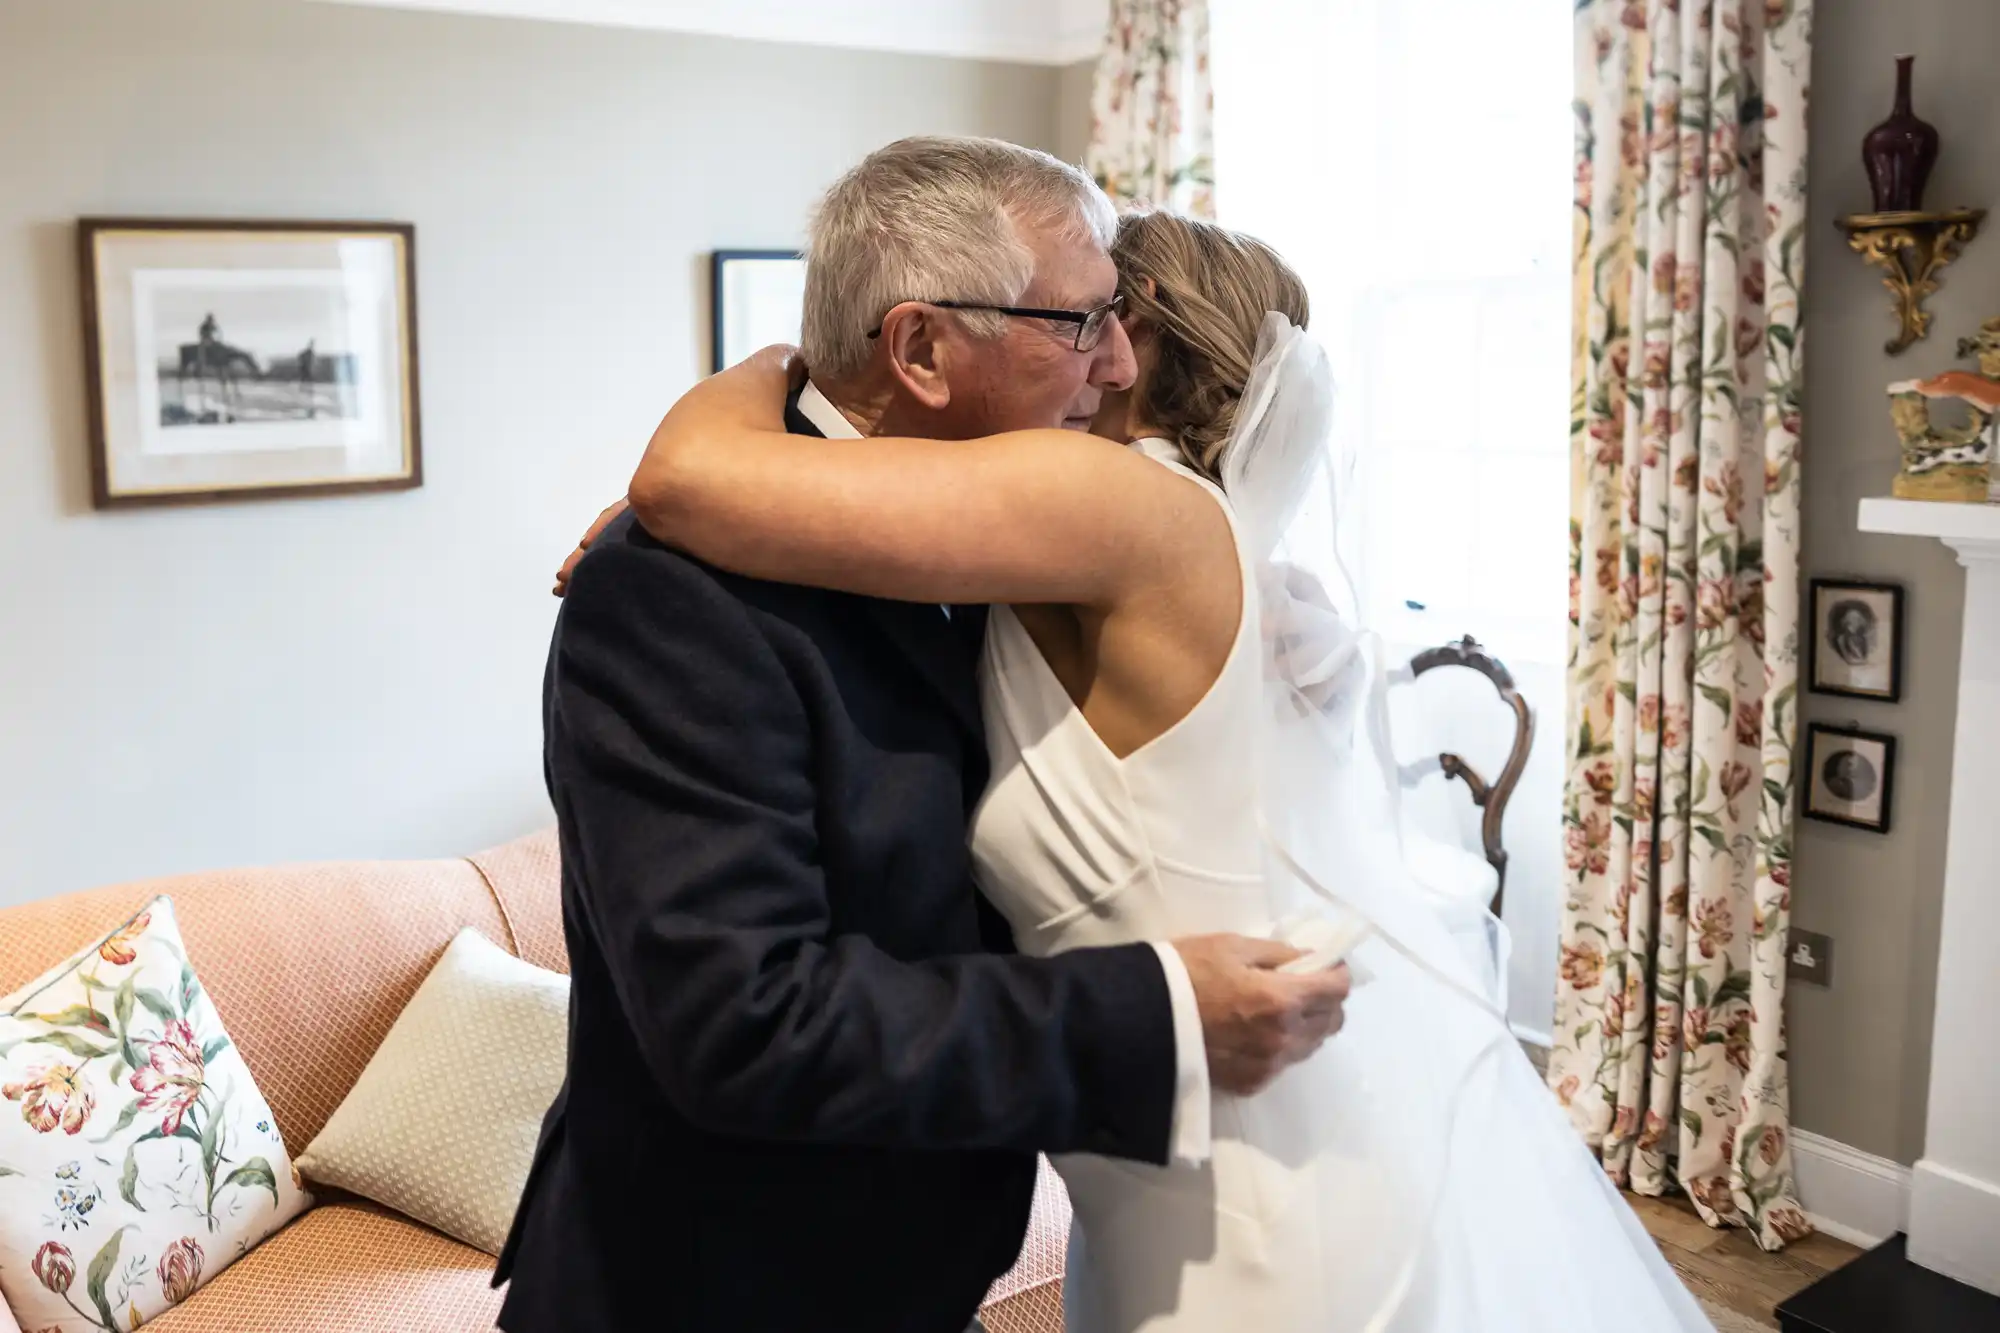 A bride in a white dress embracing an older man in a suit inside a room with elegant decor.